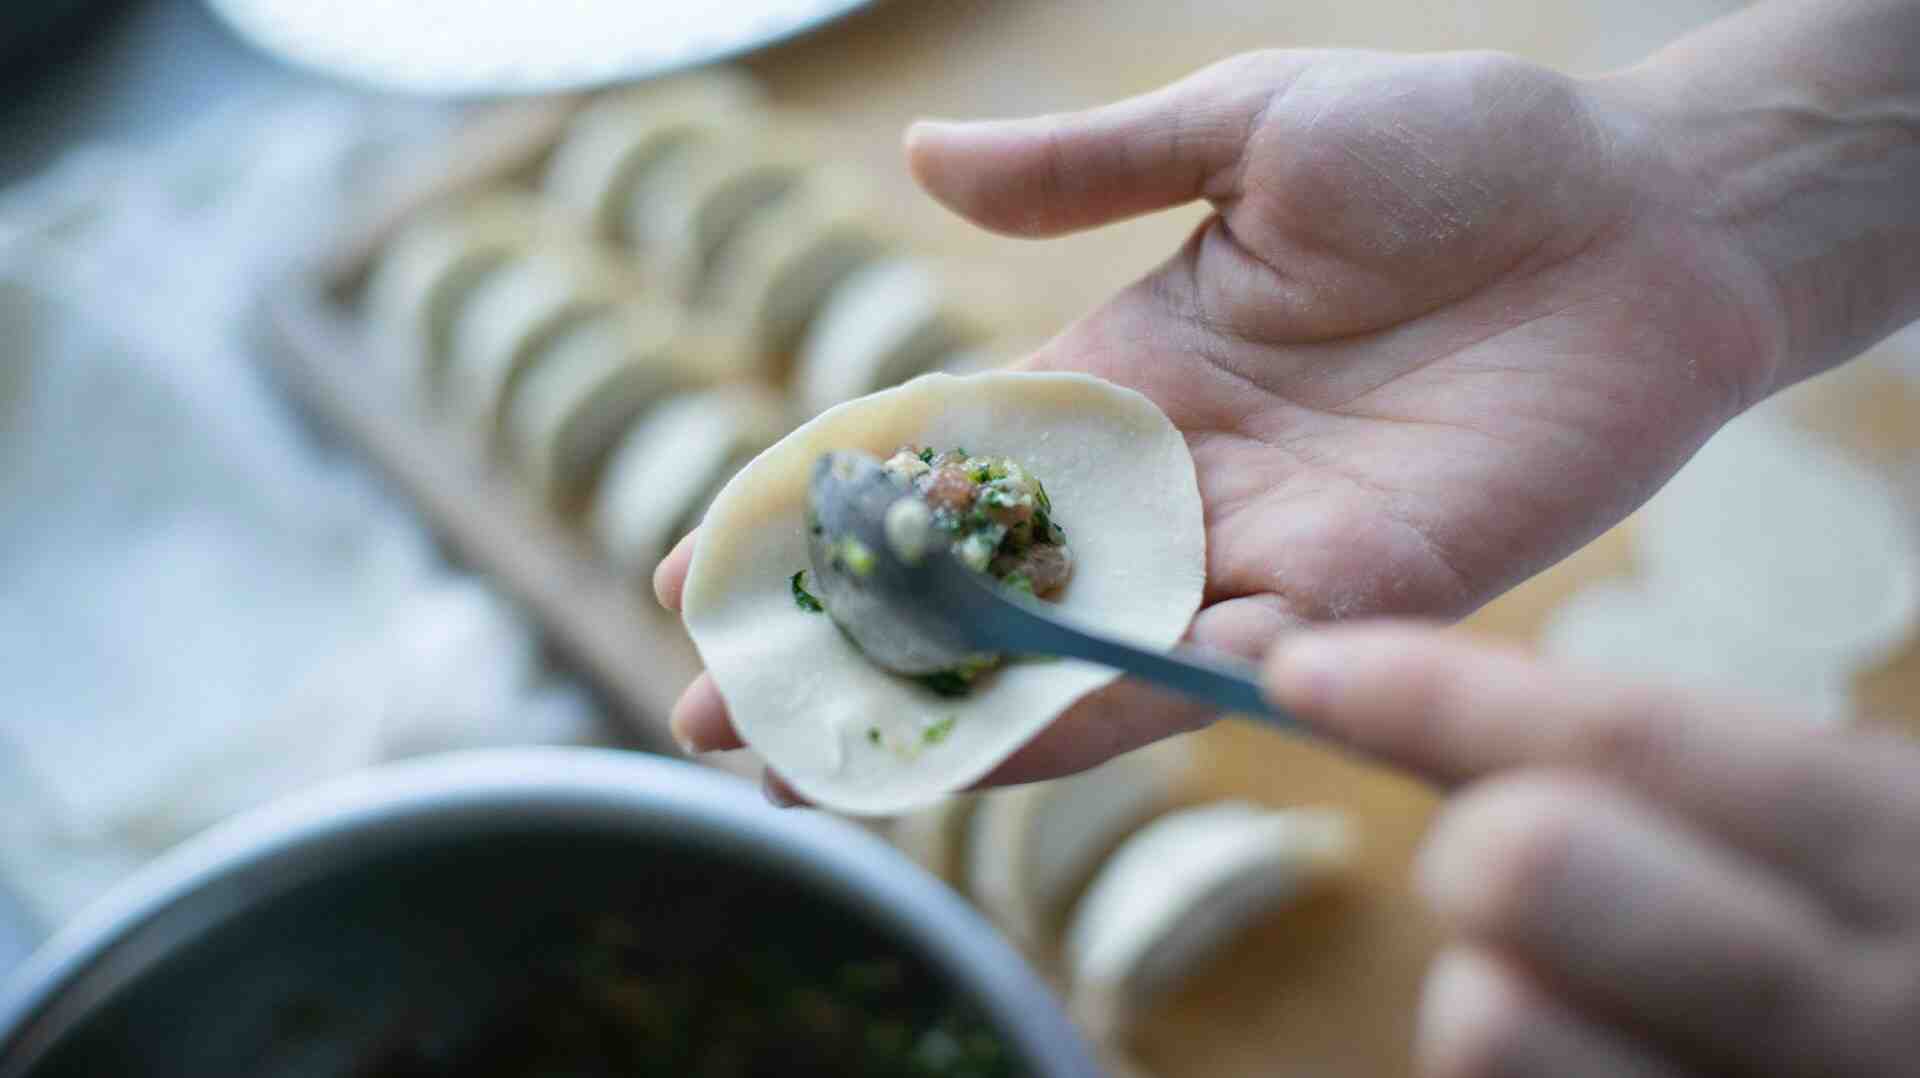 Dumpling wrappers, filling and tray